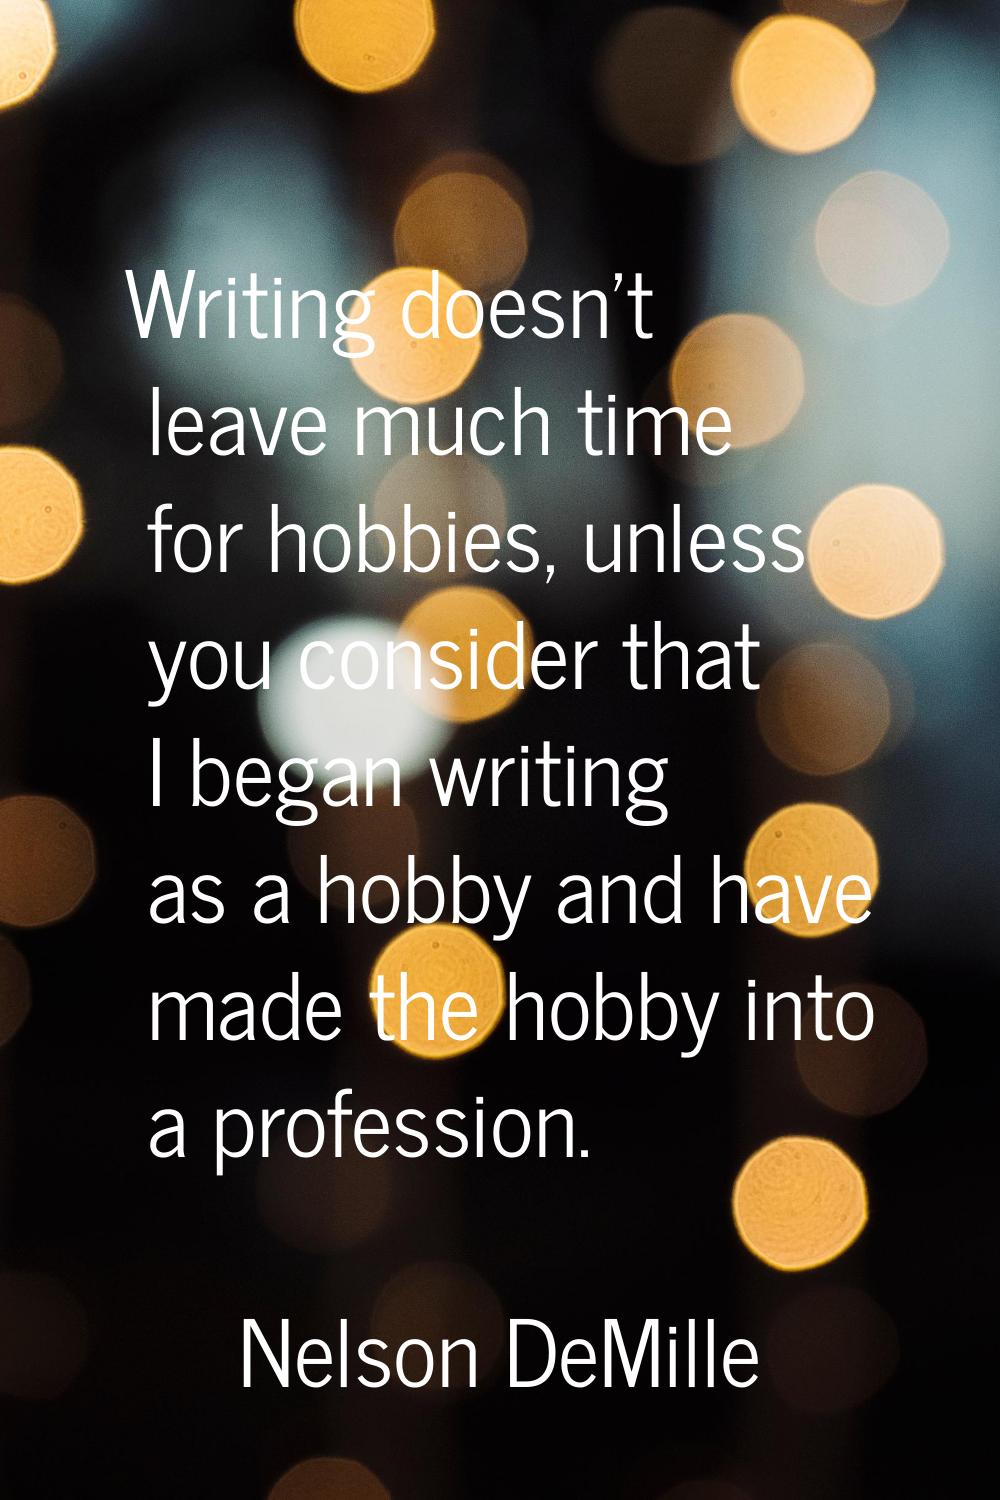 Writing doesn't leave much time for hobbies, unless you consider that I began writing as a hobby an